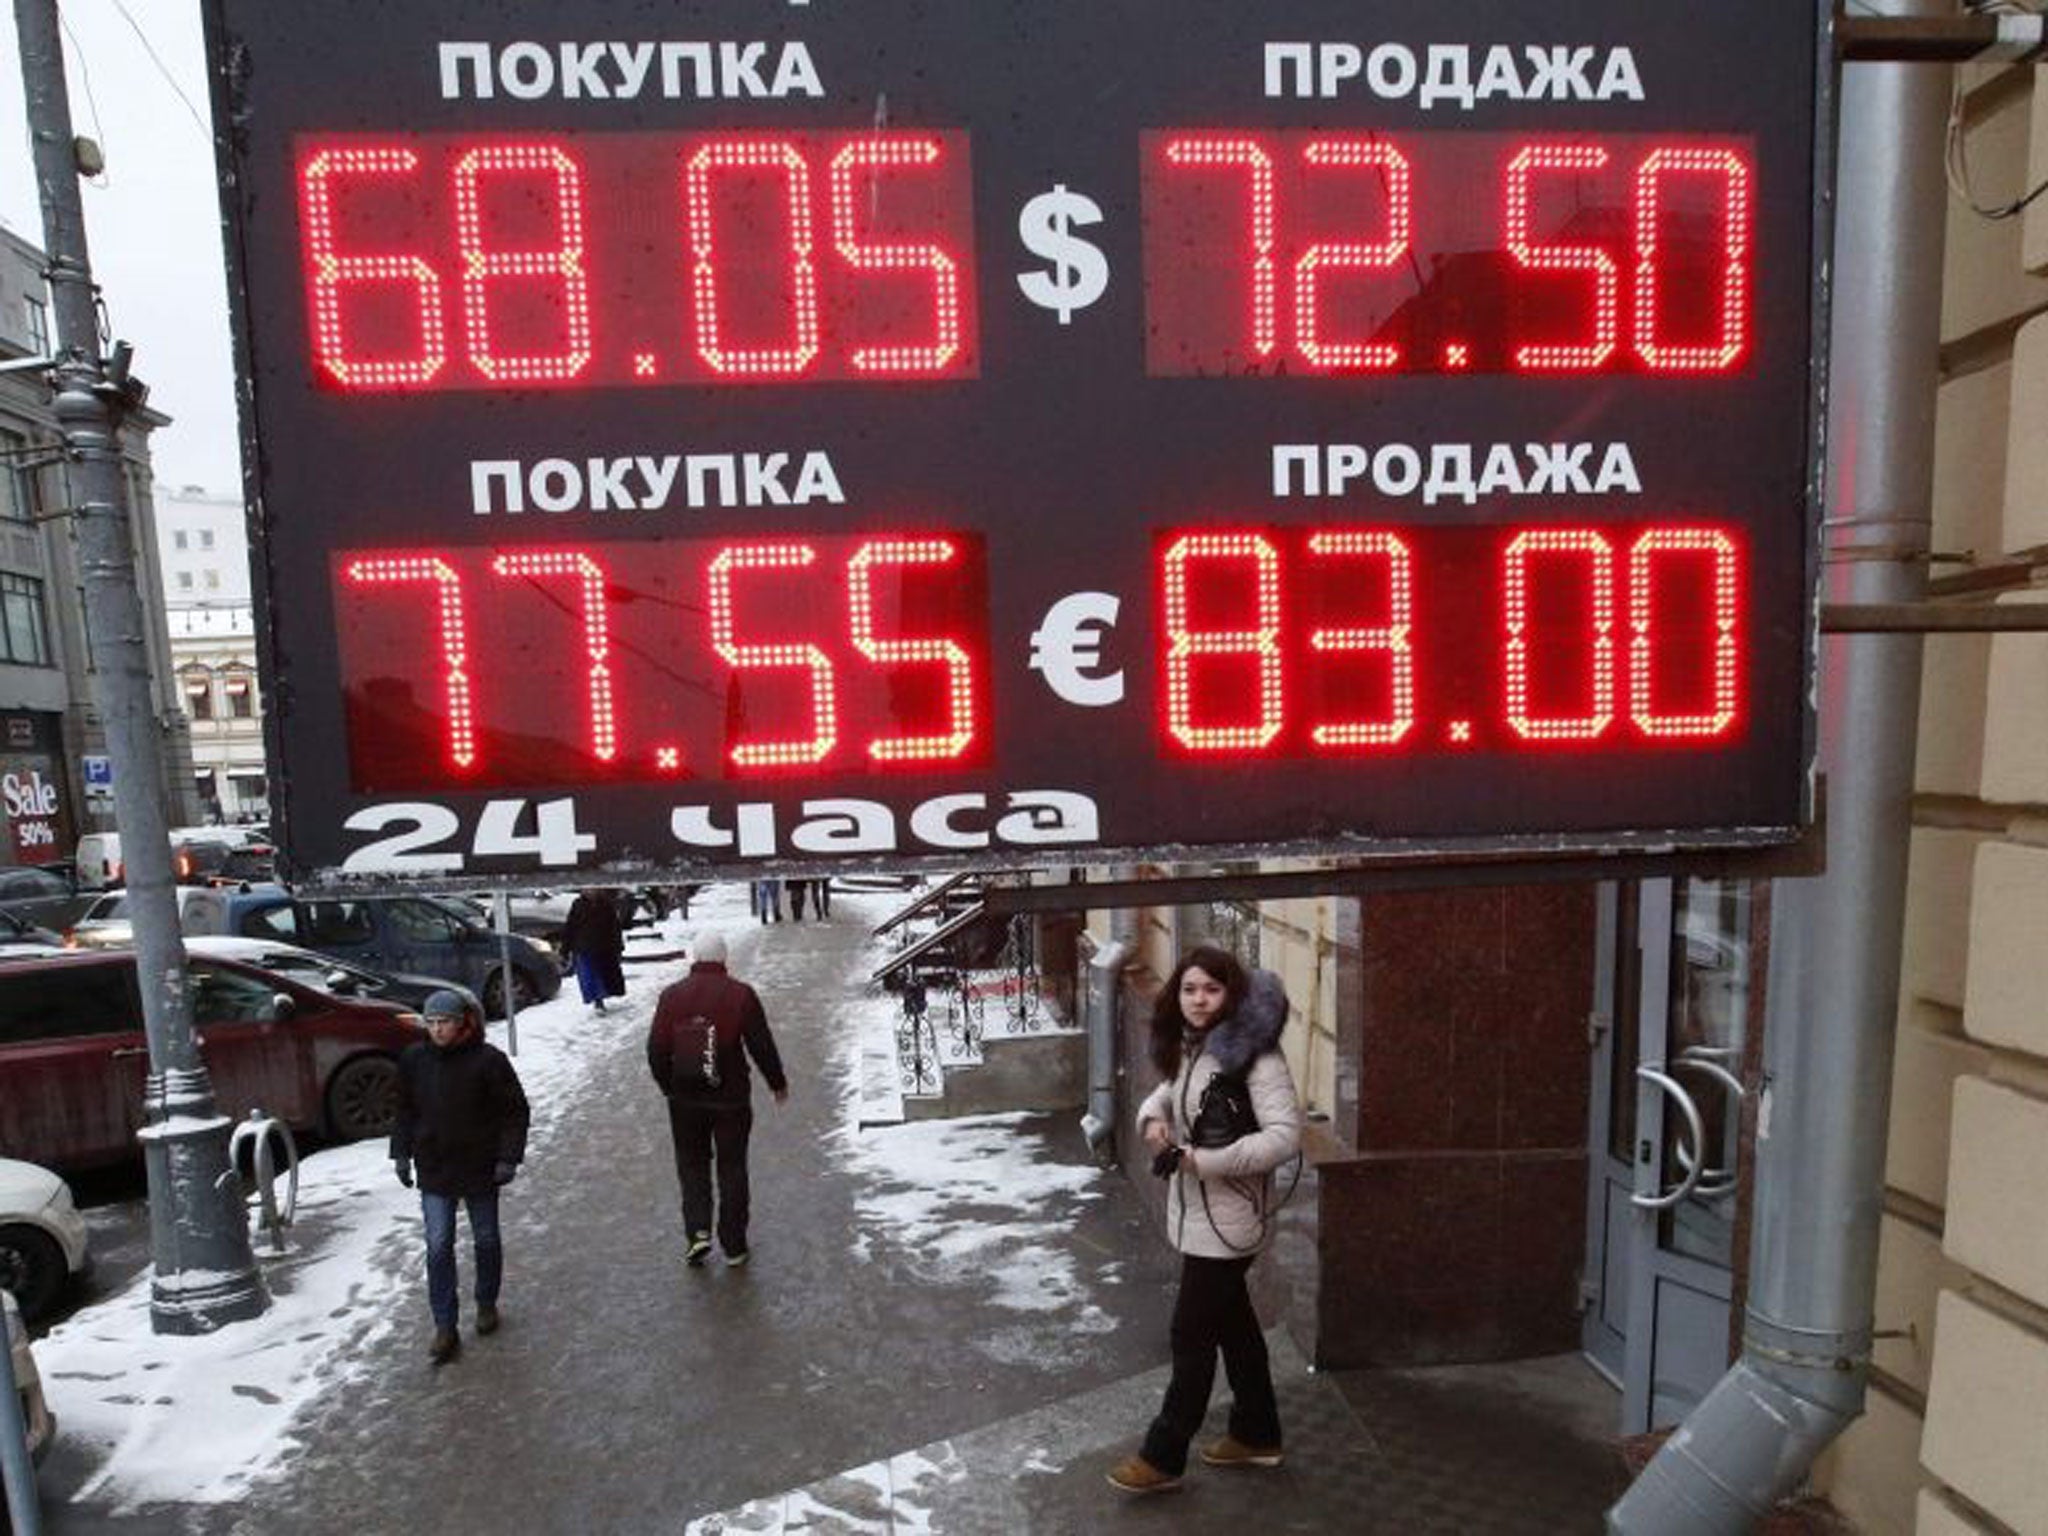 The forex charges come right on the heels of the Libor interest rate scandal